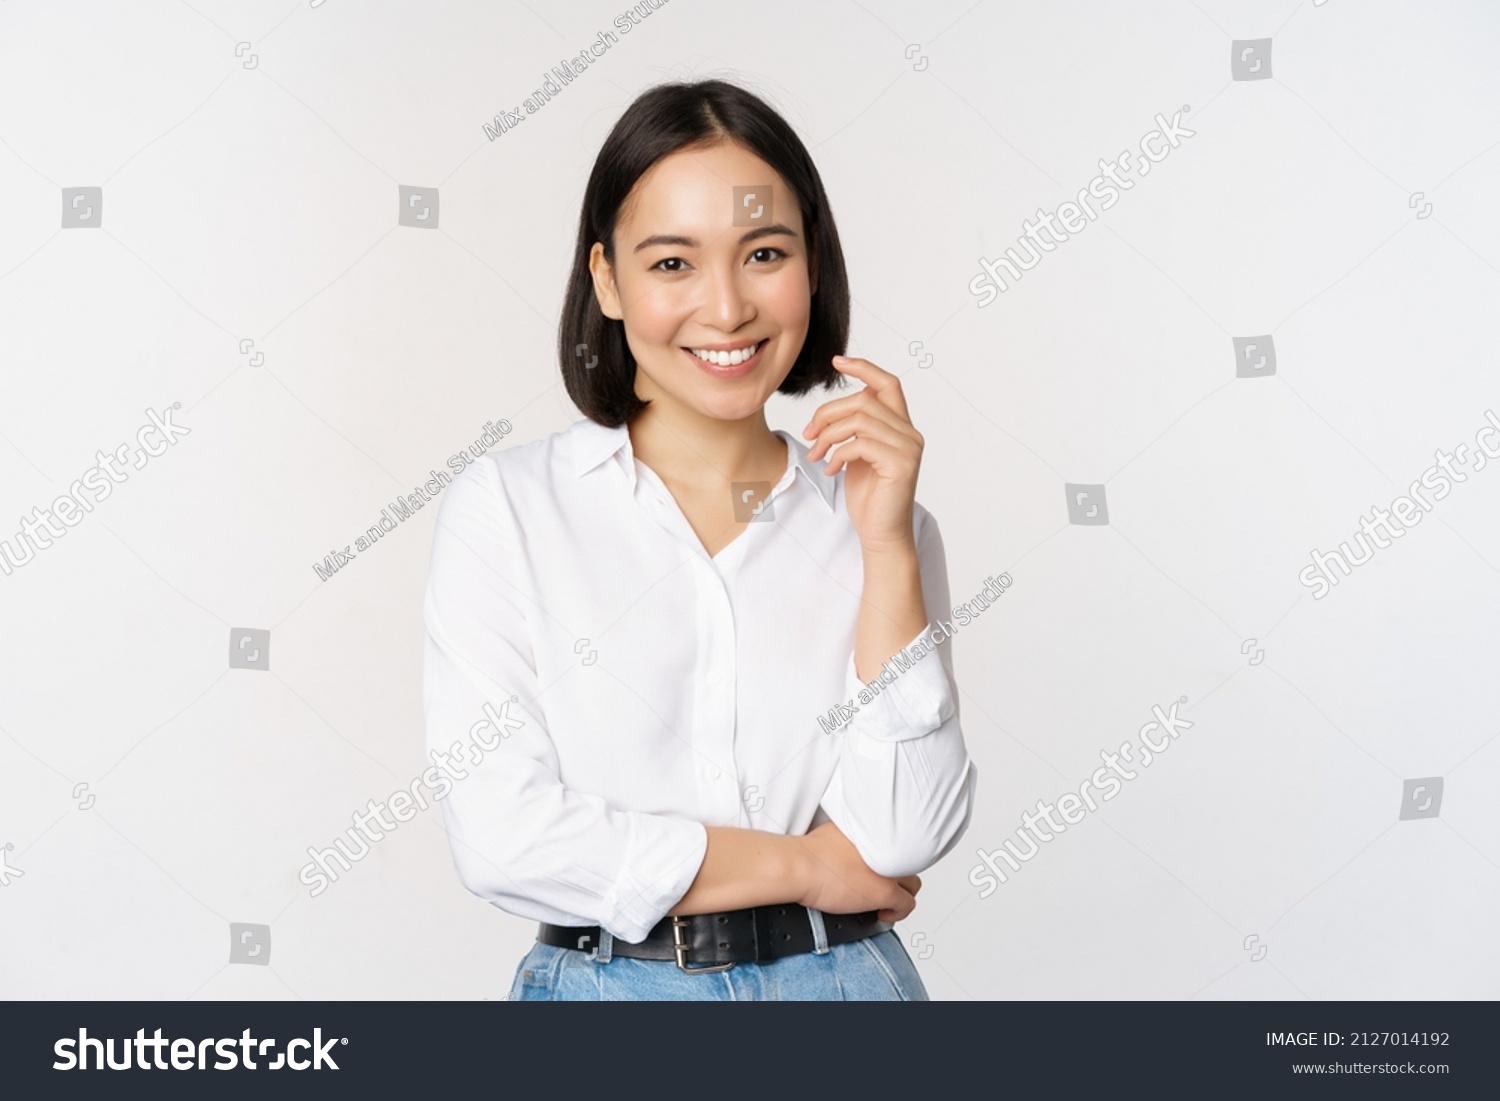 Young asian woman, professional entrepreneur standing in office clothing, smiling and looking confident, white background #2127014192